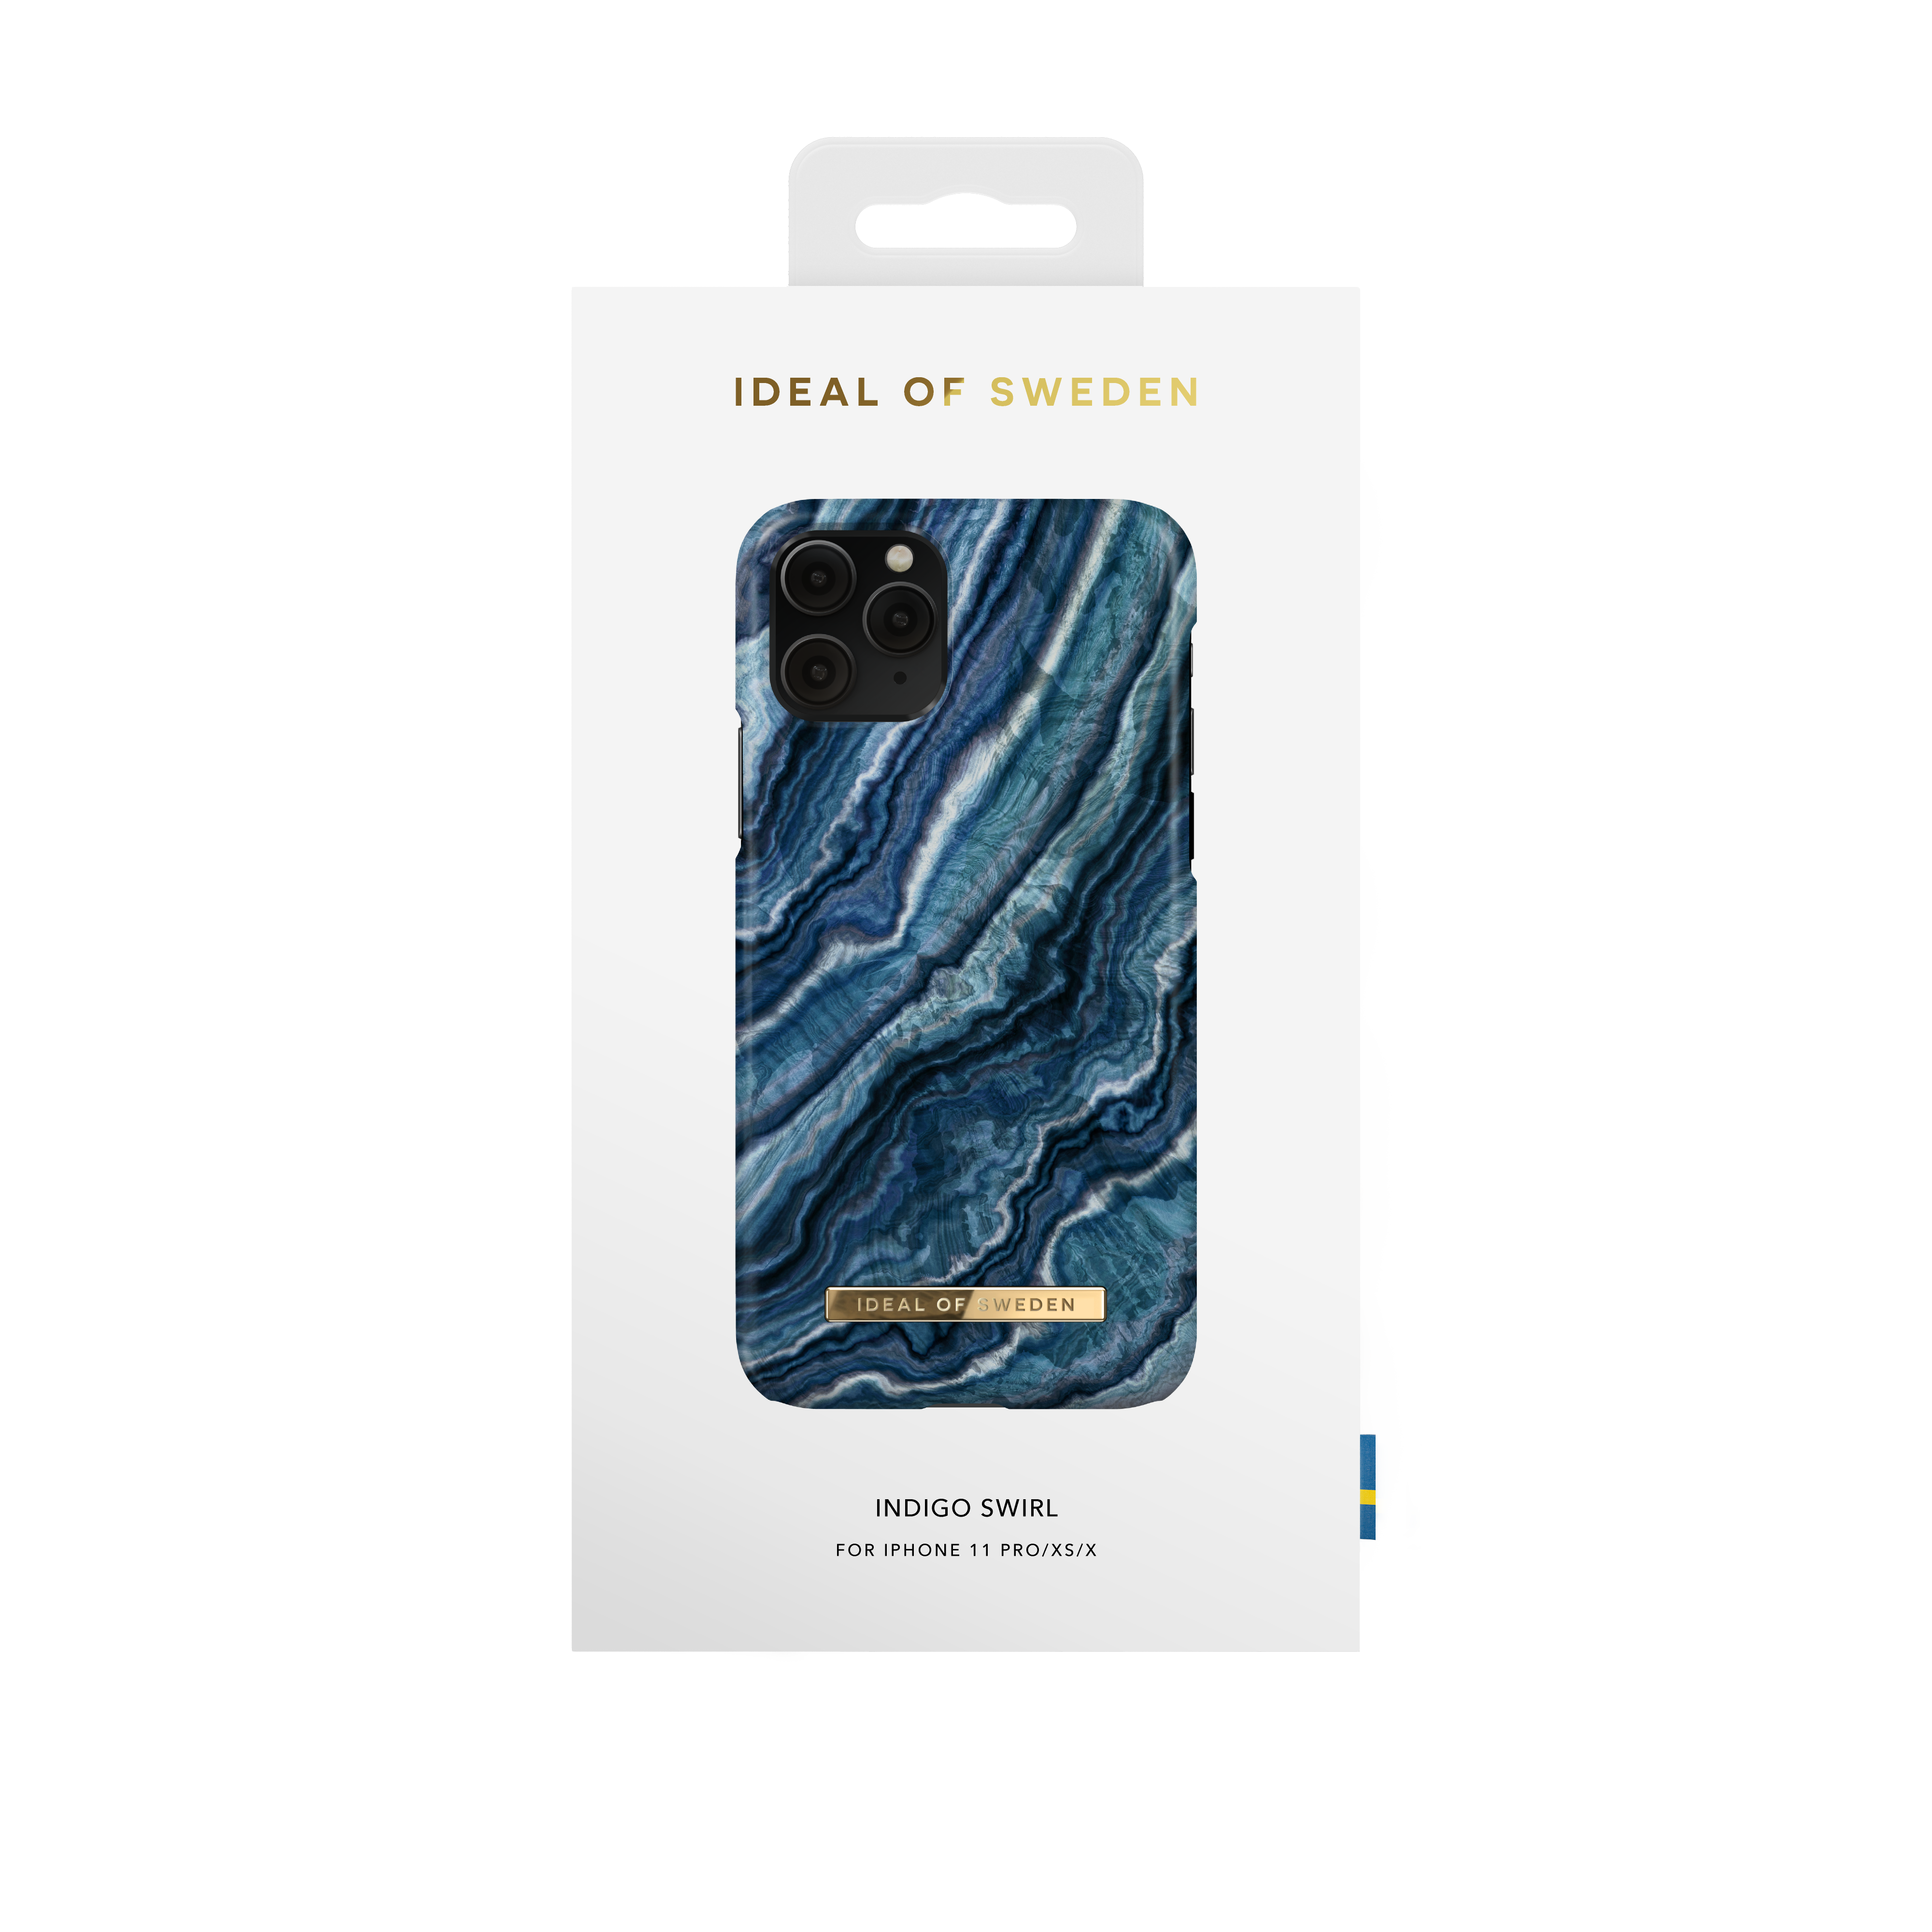 IDEAL OF iPhone iPhone IDFCSS19-I1958-119, Indigo Pro, X, Apple, Swirl Backcover, SWEDEN iPhone XS, 11